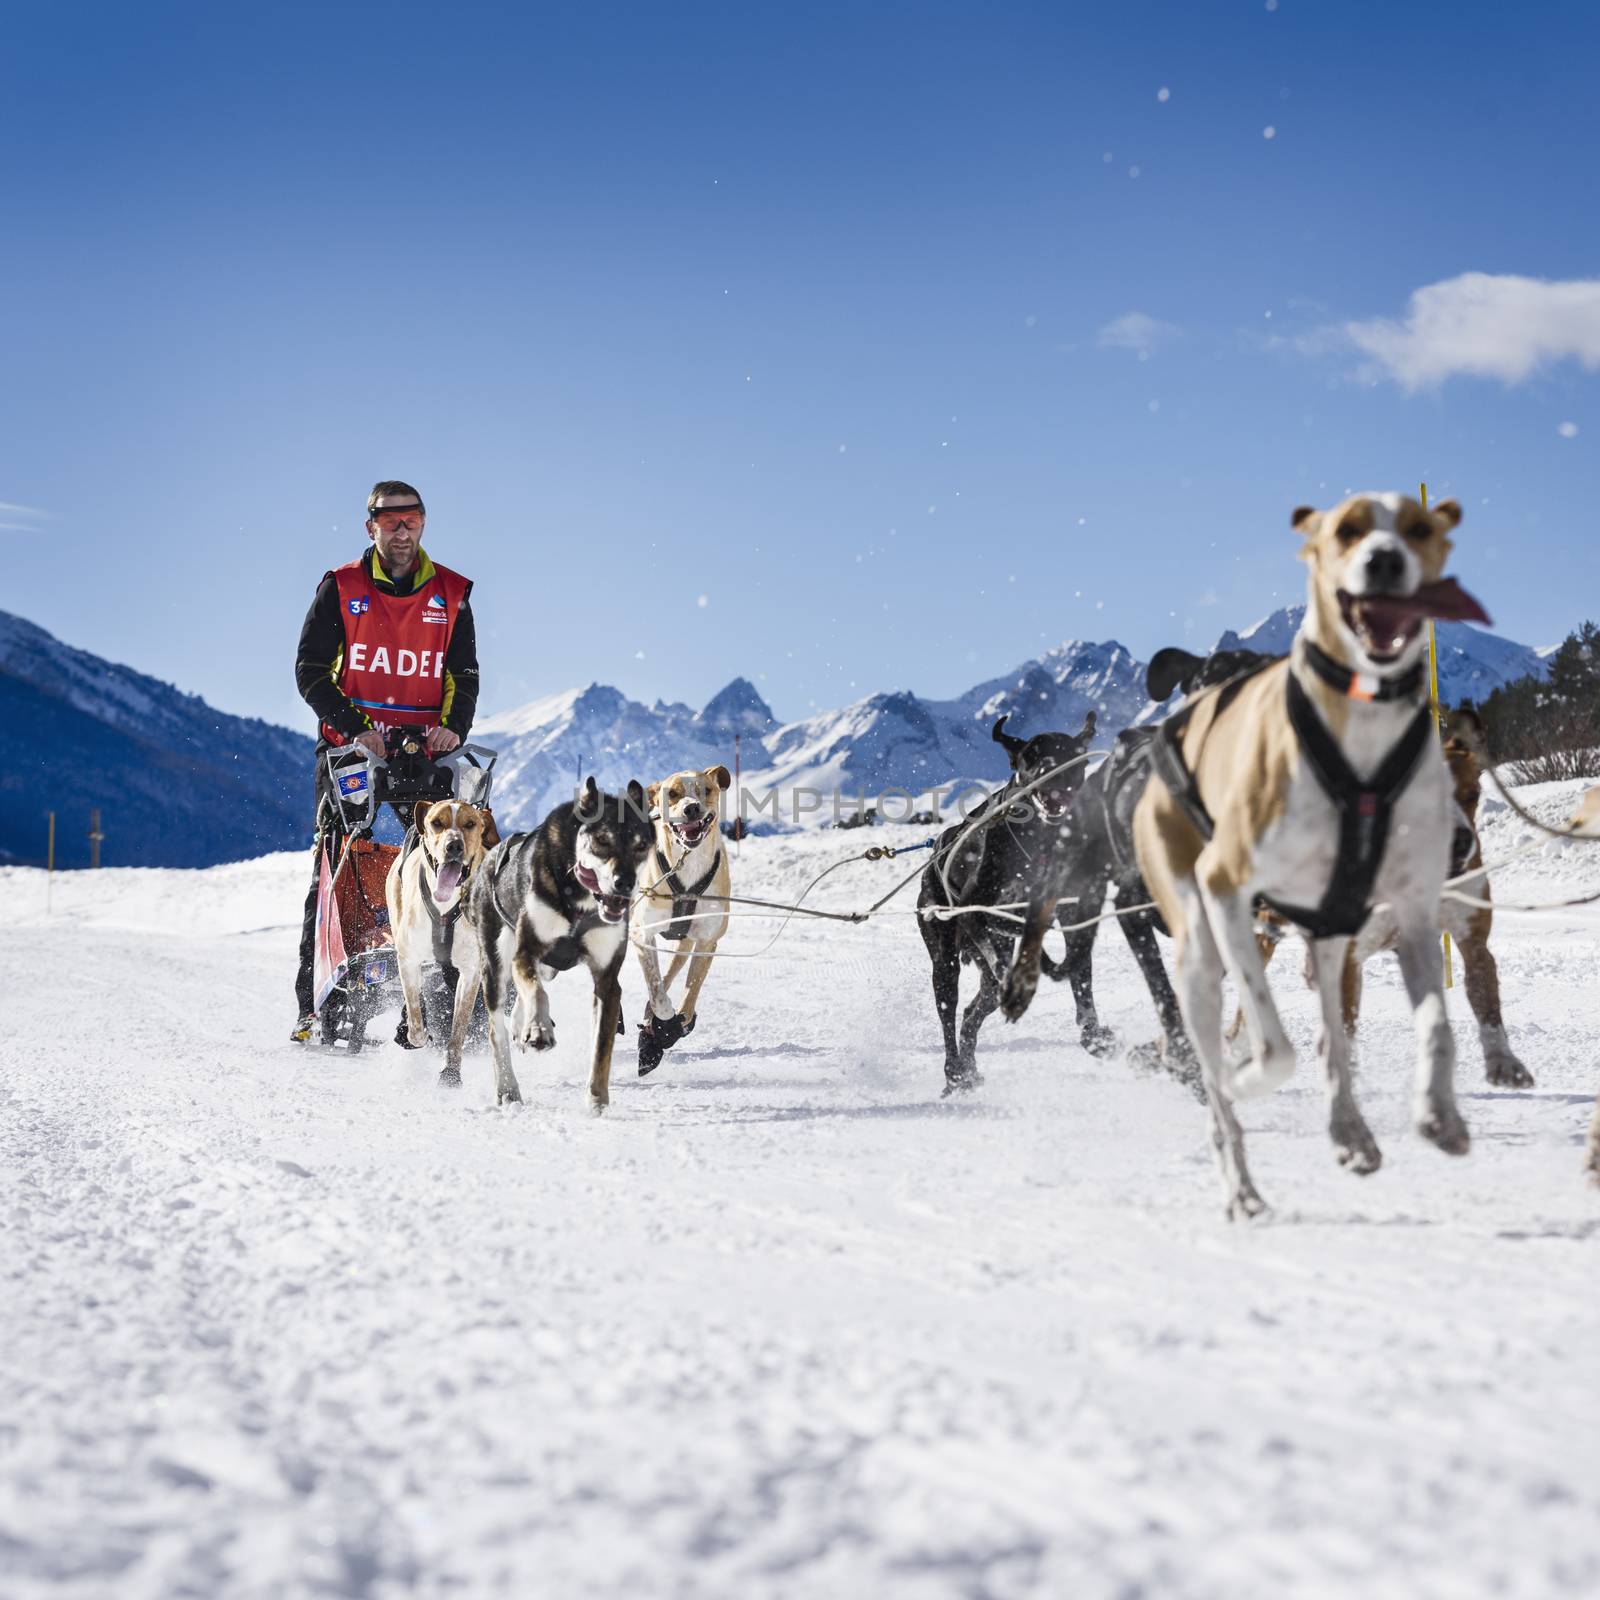 AUSSOIS SUR ARC, VANOISE, FRANCE - JANUARY 20 2016 - the GRANDE ODYSSEE the hardest mushers race in savoie Mont-Blanc, Remy COSTE, french musher, Vanoise, Alps